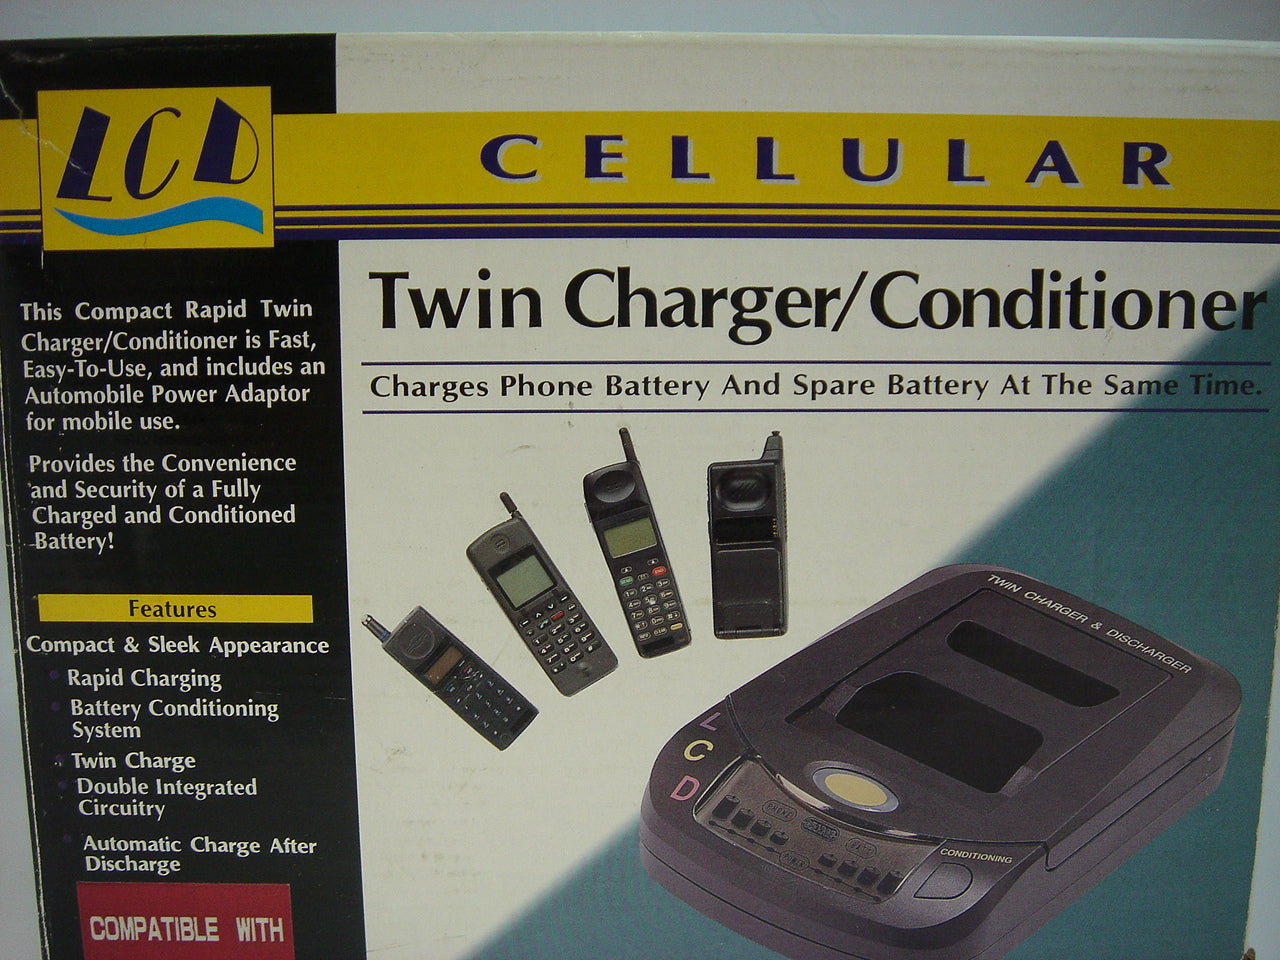 PR02384_NA-168_ONLINE Cellular Twin Charger/Conditioner - Image3